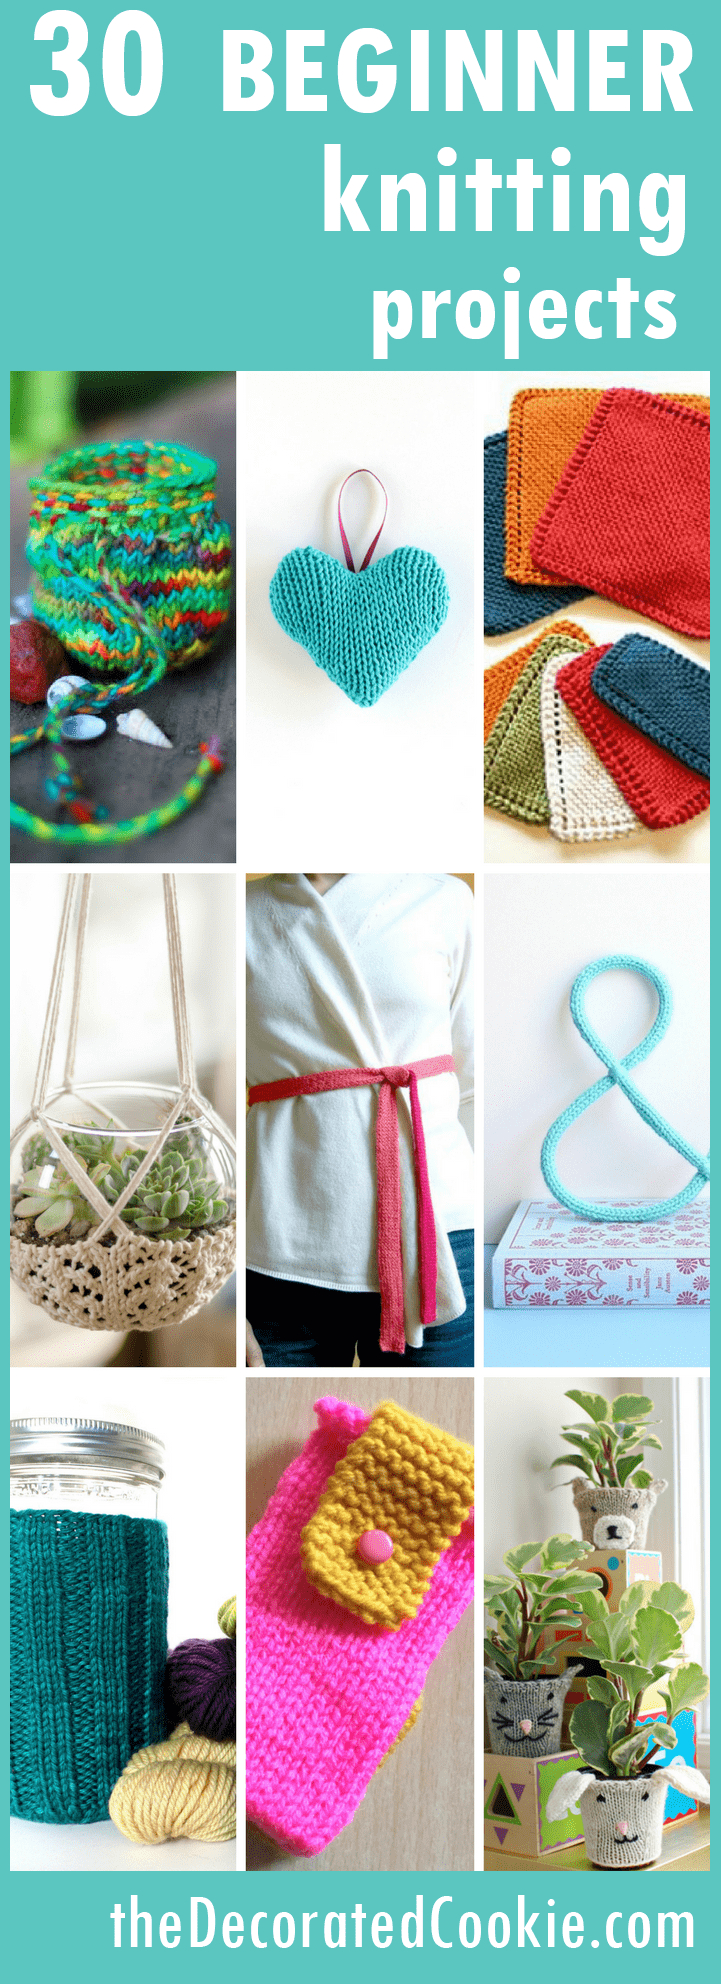 Knitted Scarf Patterns Pinterest Knitting For Beginners A Roundup Of 20 Easy Knitting Projects